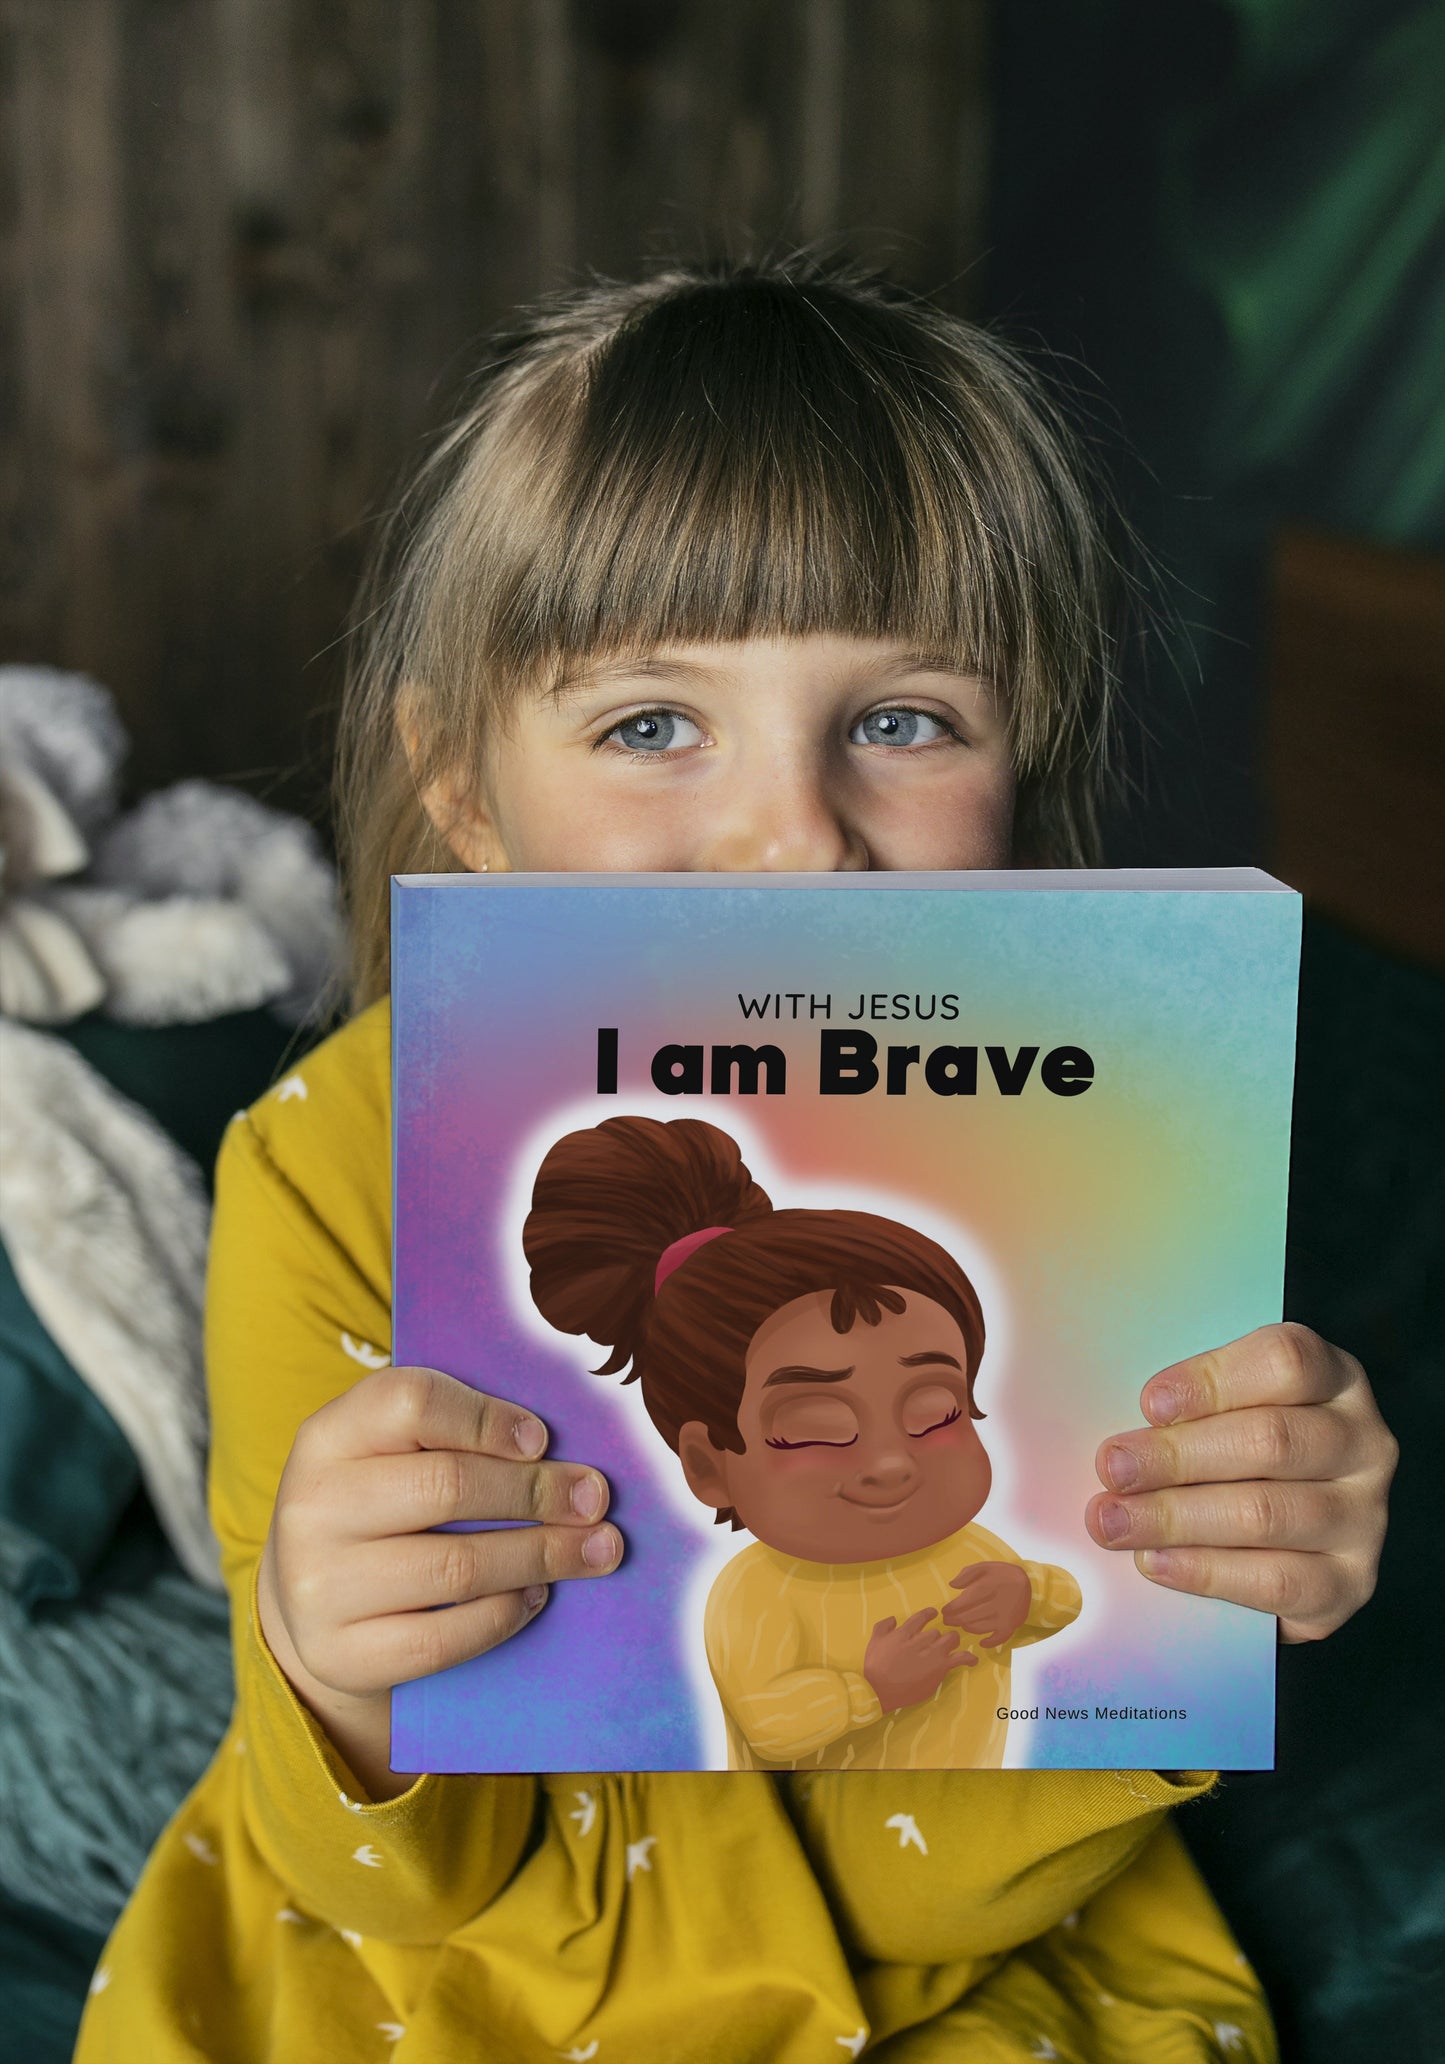 With Jesus I am Brave - Printed in UK